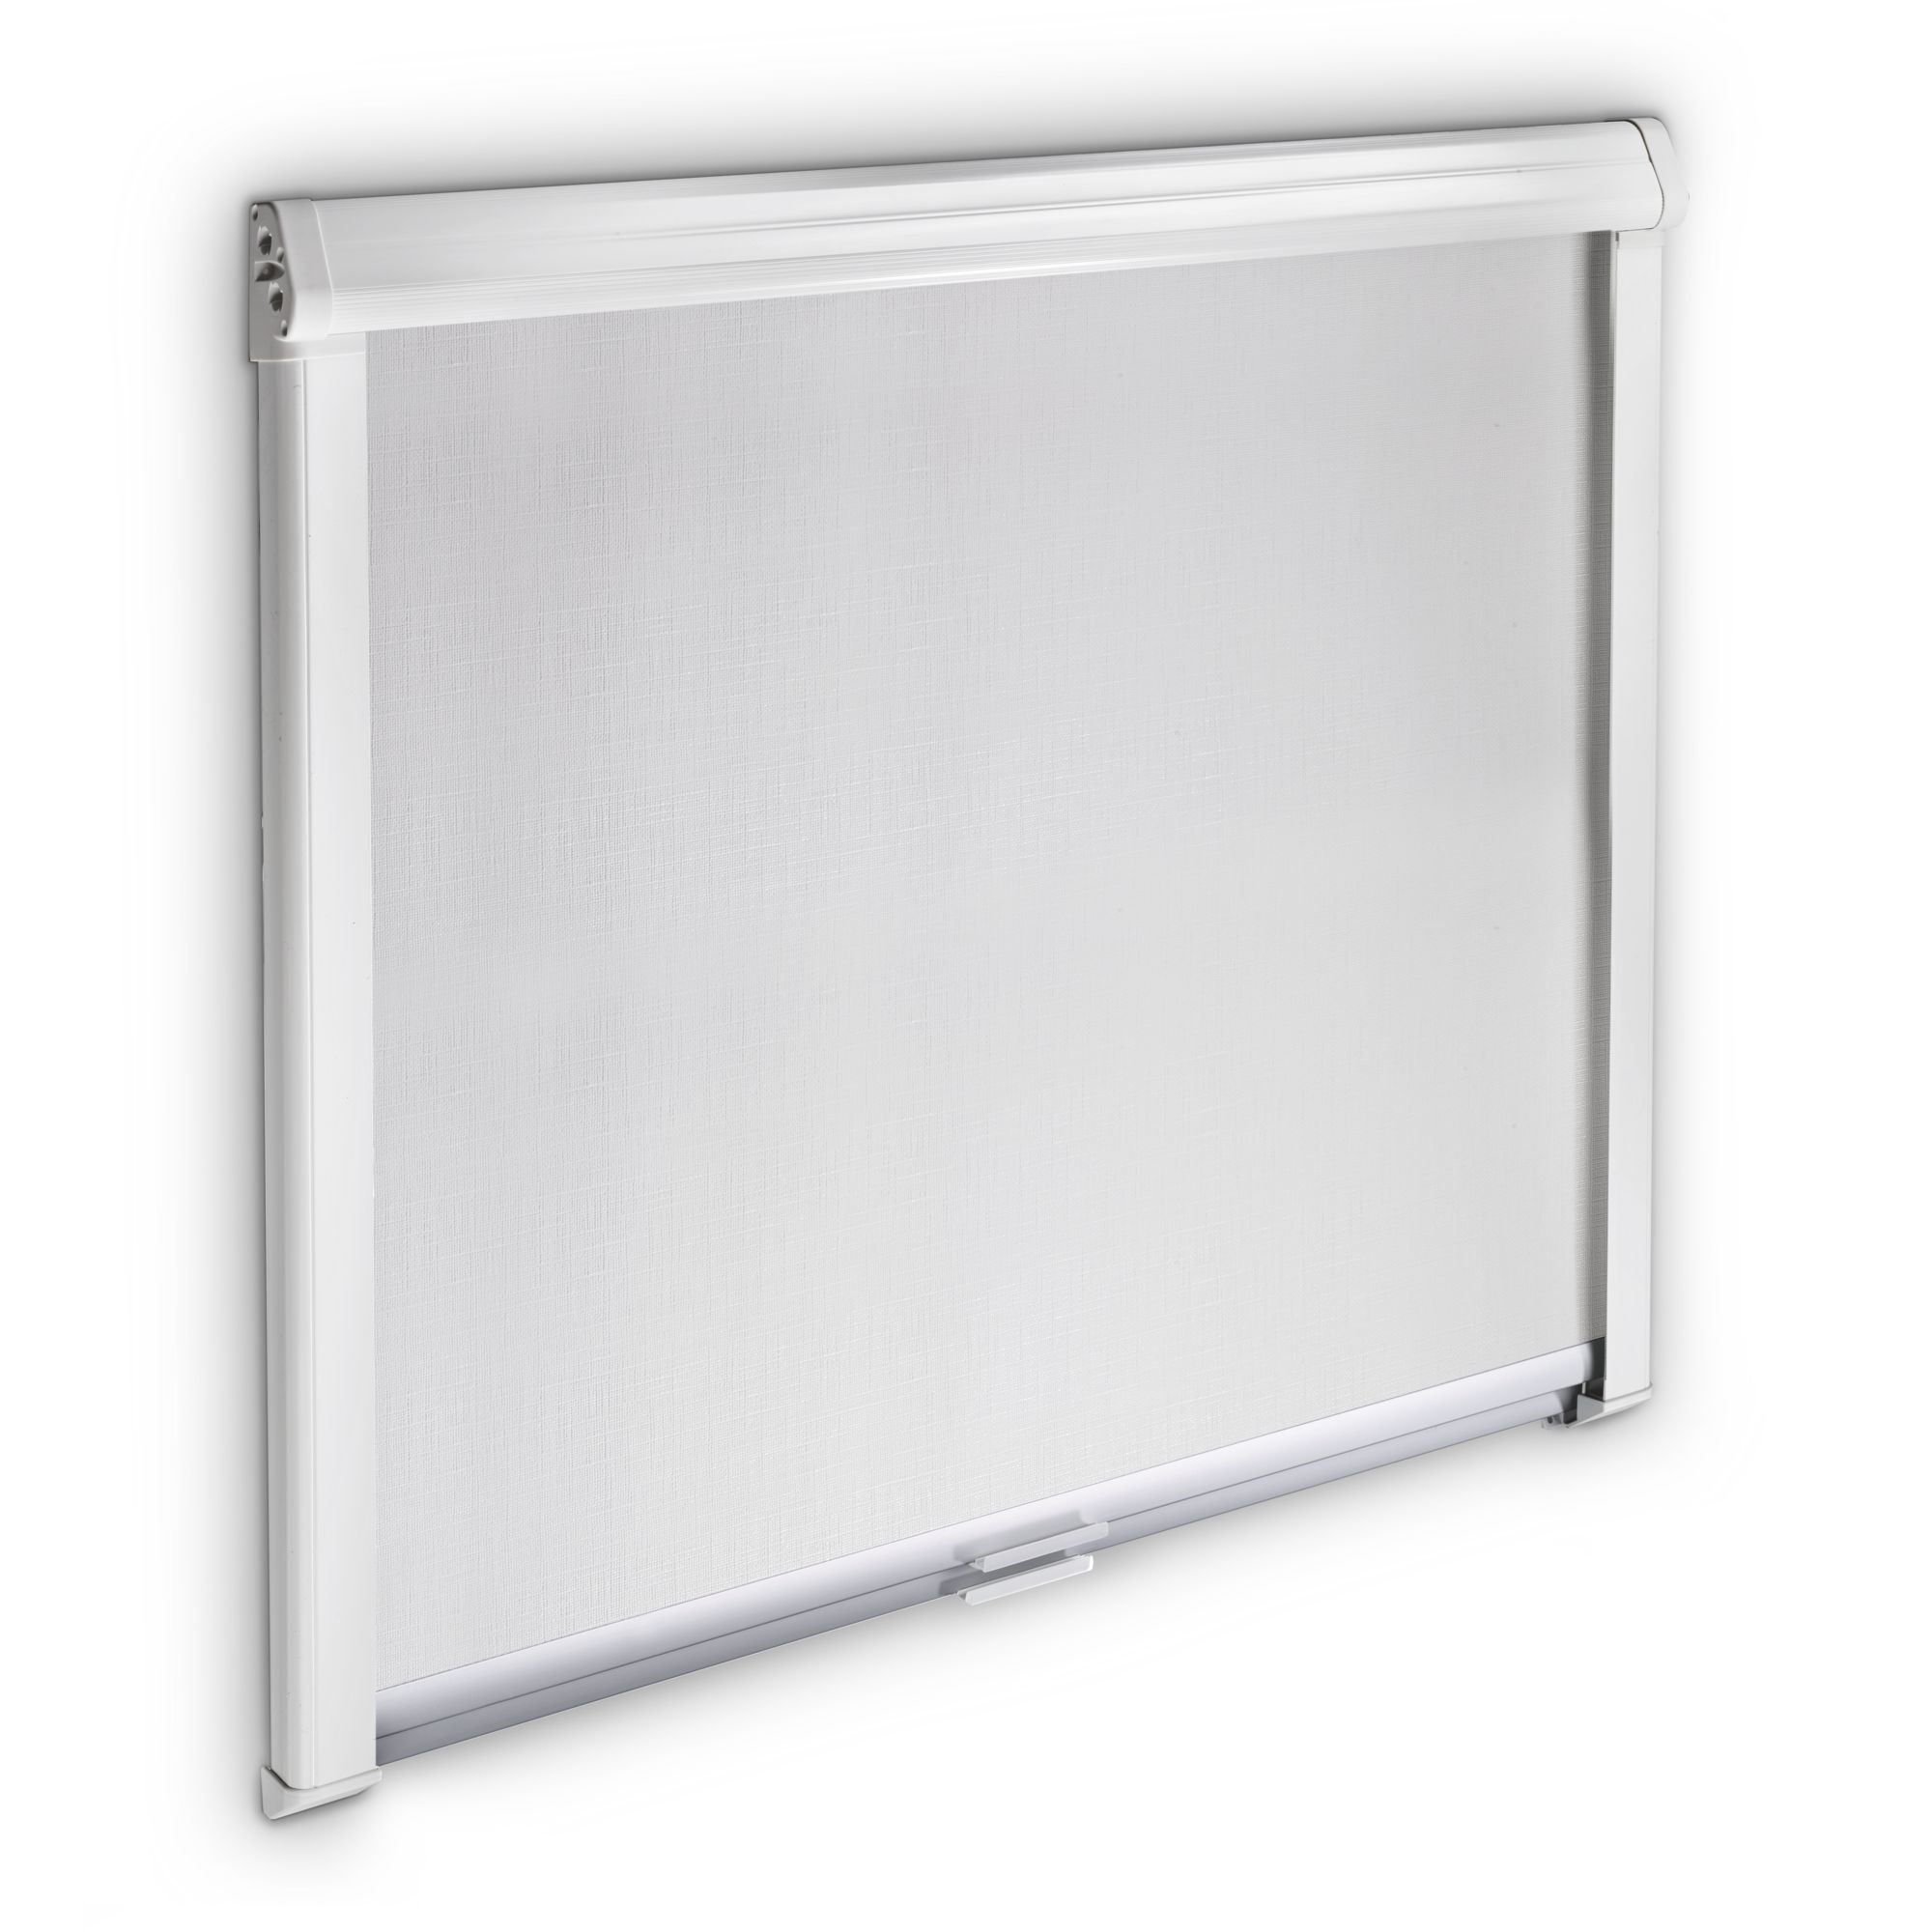 Dometic Black-Out Roller Blind 3000, 960 x 710 mm, traffic-white